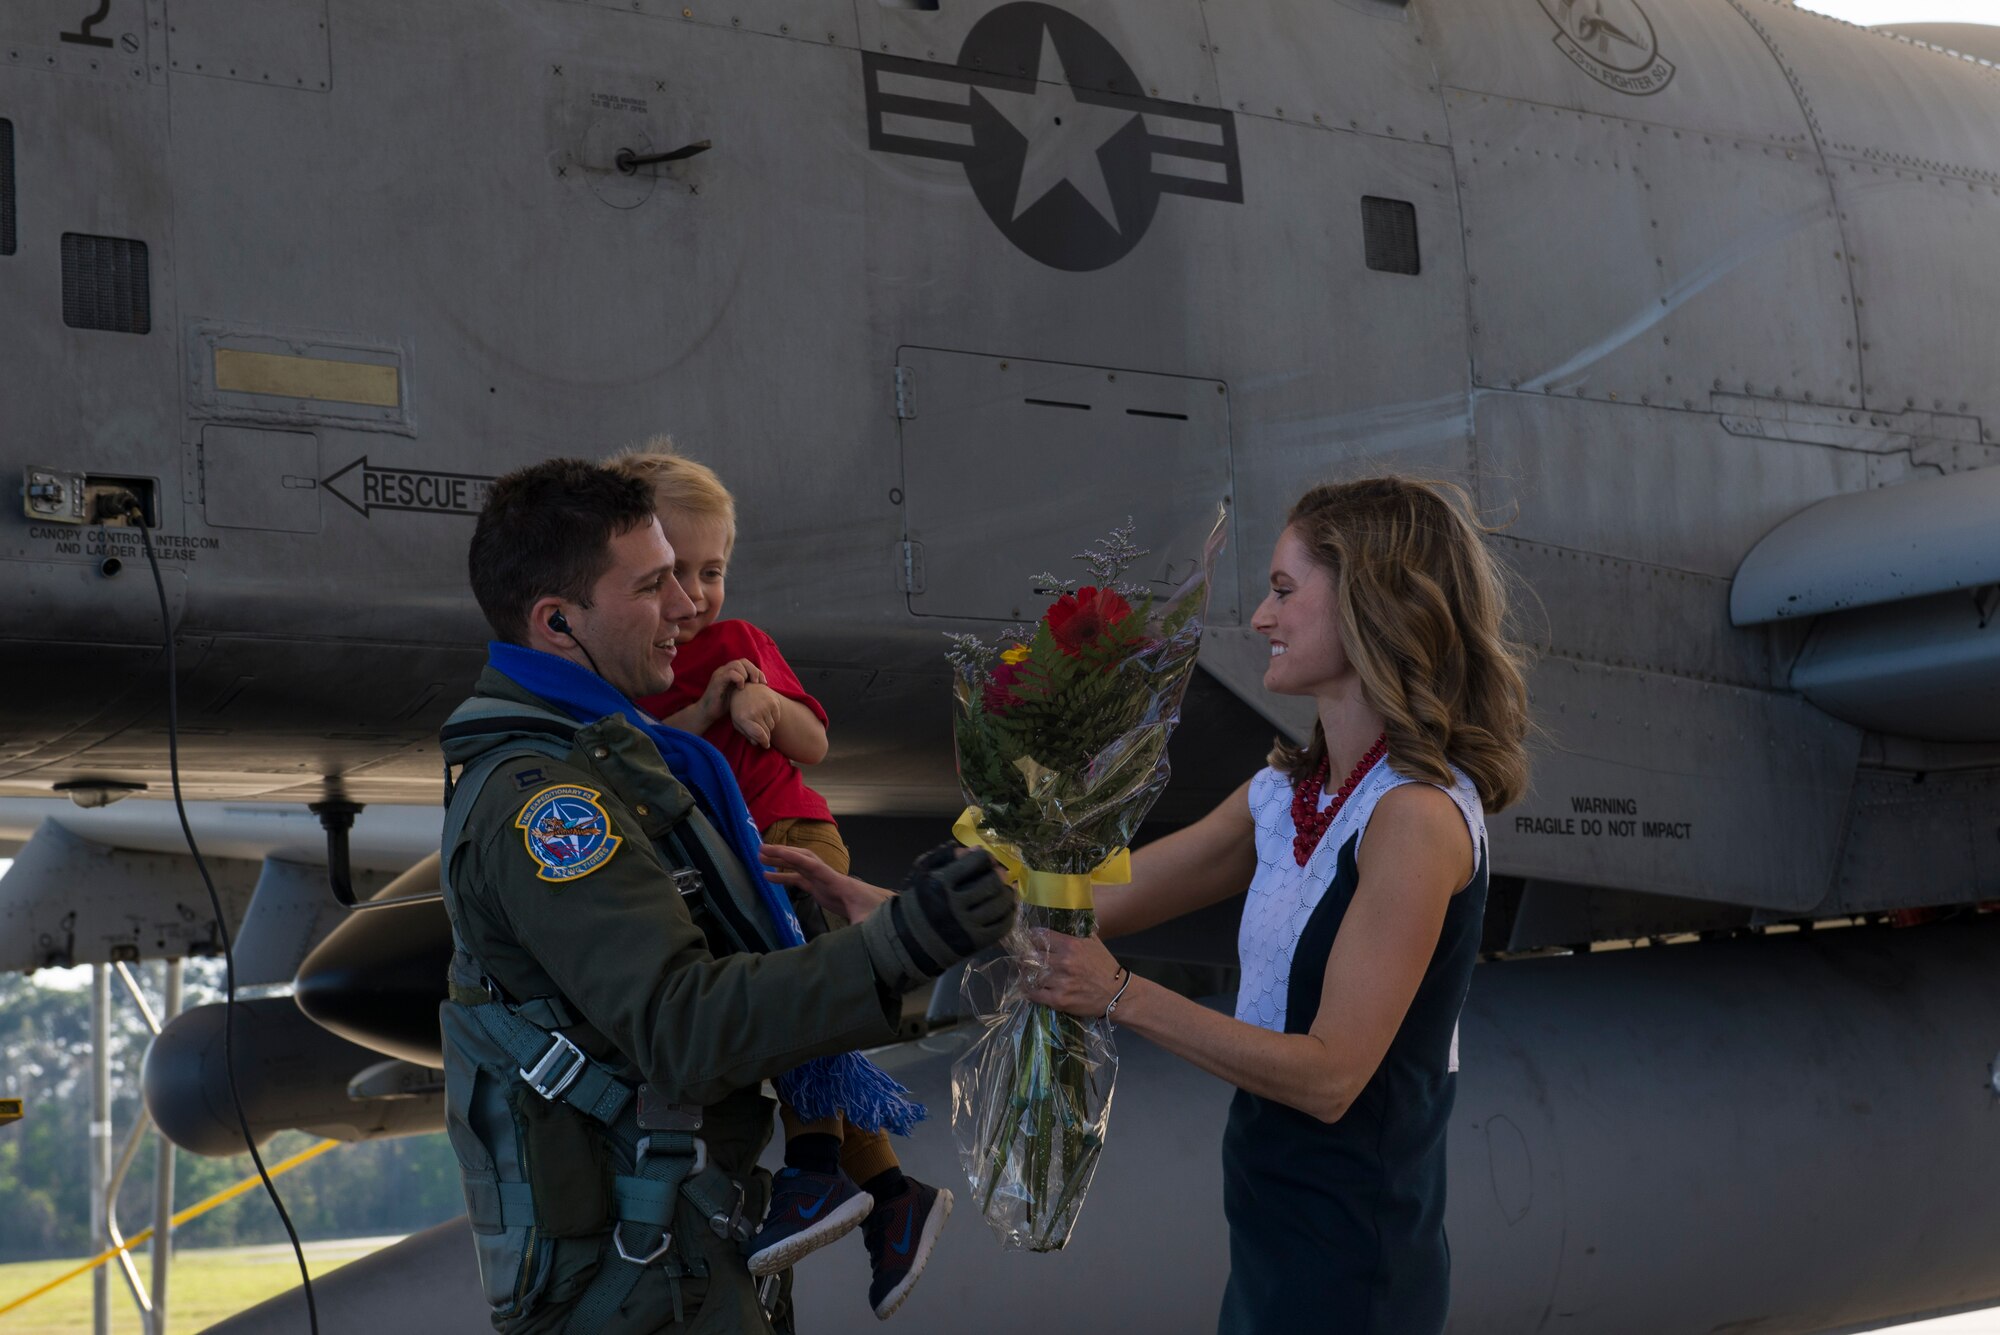 U.S. Air Force Capt. James Knauss, 74th Expeditionary Fighter Squadron A-10C Thunderbolt II pilot, greets his wife and son, James and Hannah, as he returns from a deployment, March 22, 2016, at Moody Air Force Base, Ga. Approximately 10 Moody A-10C Thunderbolt II’s contributed to multiple events and exercises while visiting 15 countries, conducting nearly 1,190 sorties in support of Operation Atlantic Resolve. (U.S. Air Force photo by Airman 1st Class Greg Nash/Released) 
